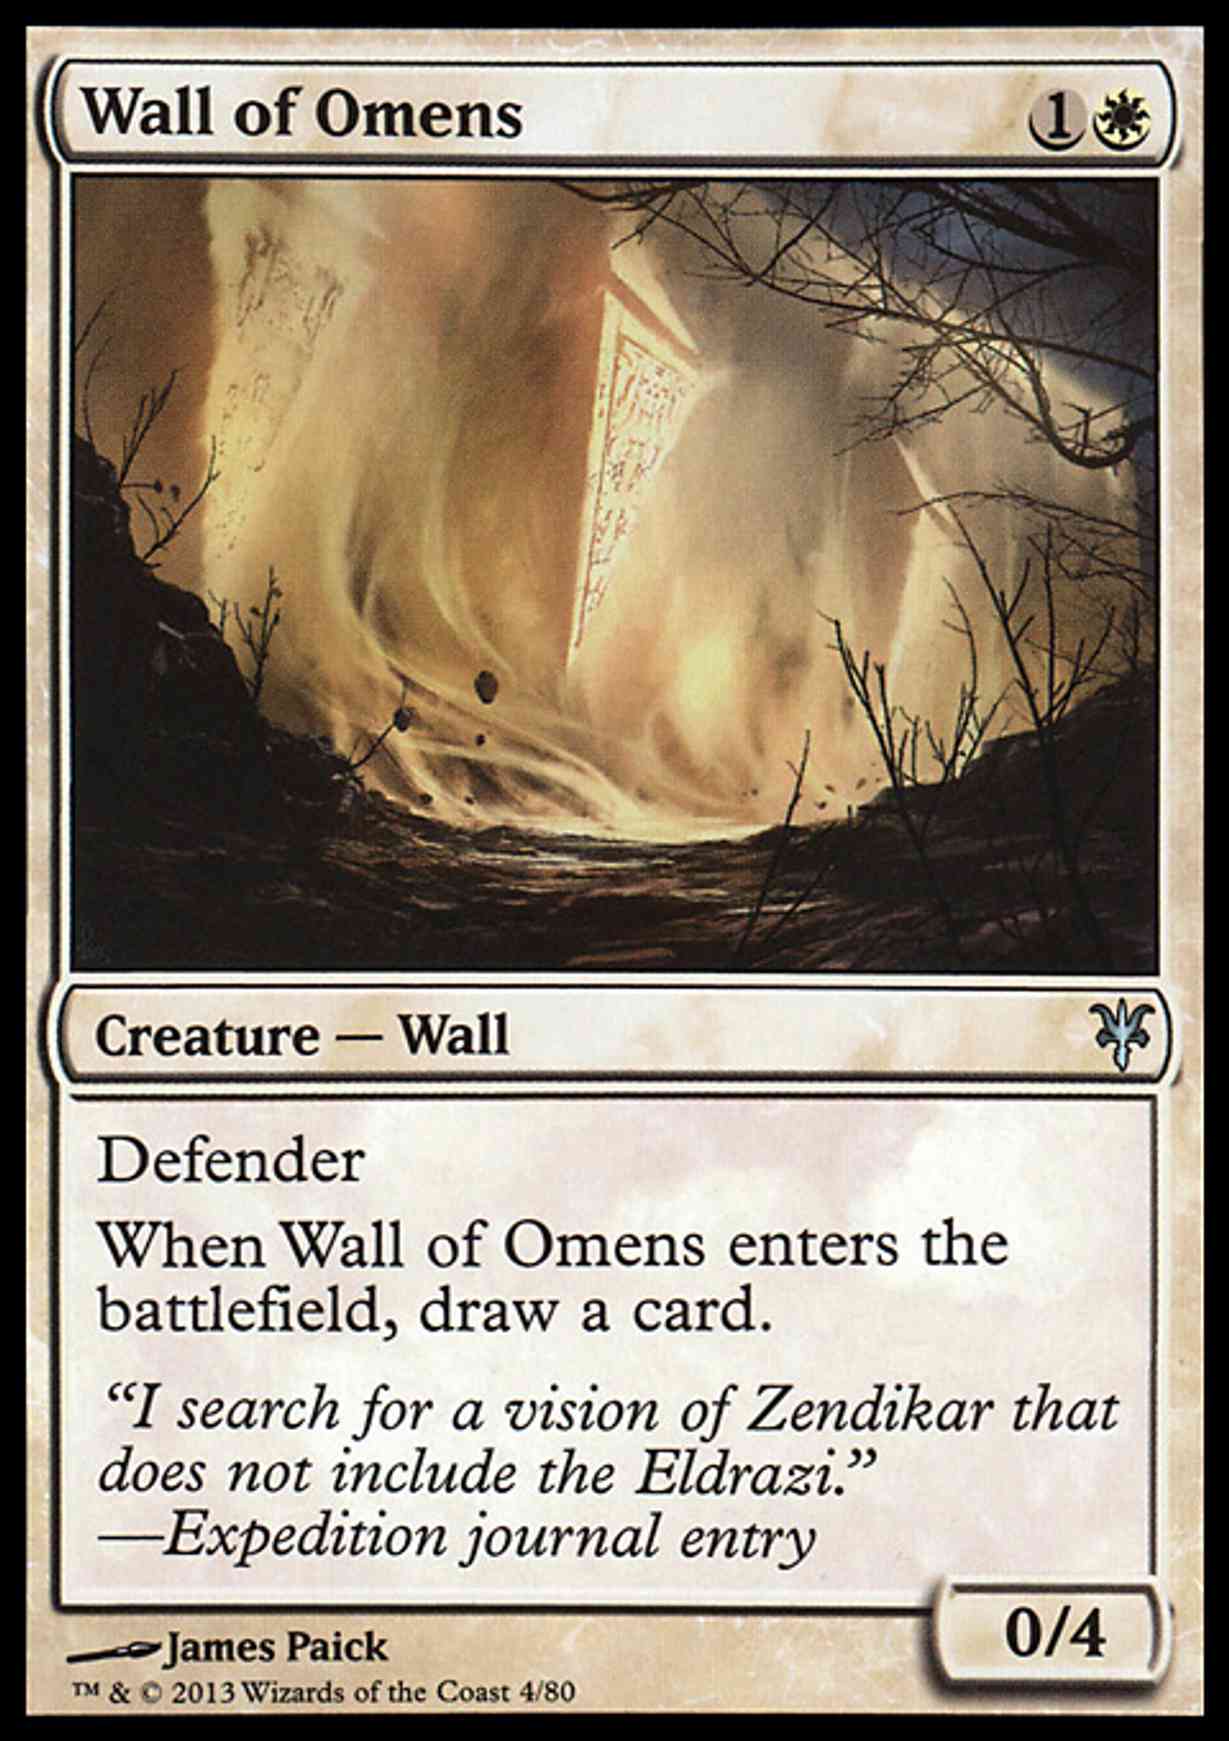 Wall of Omens magic card front